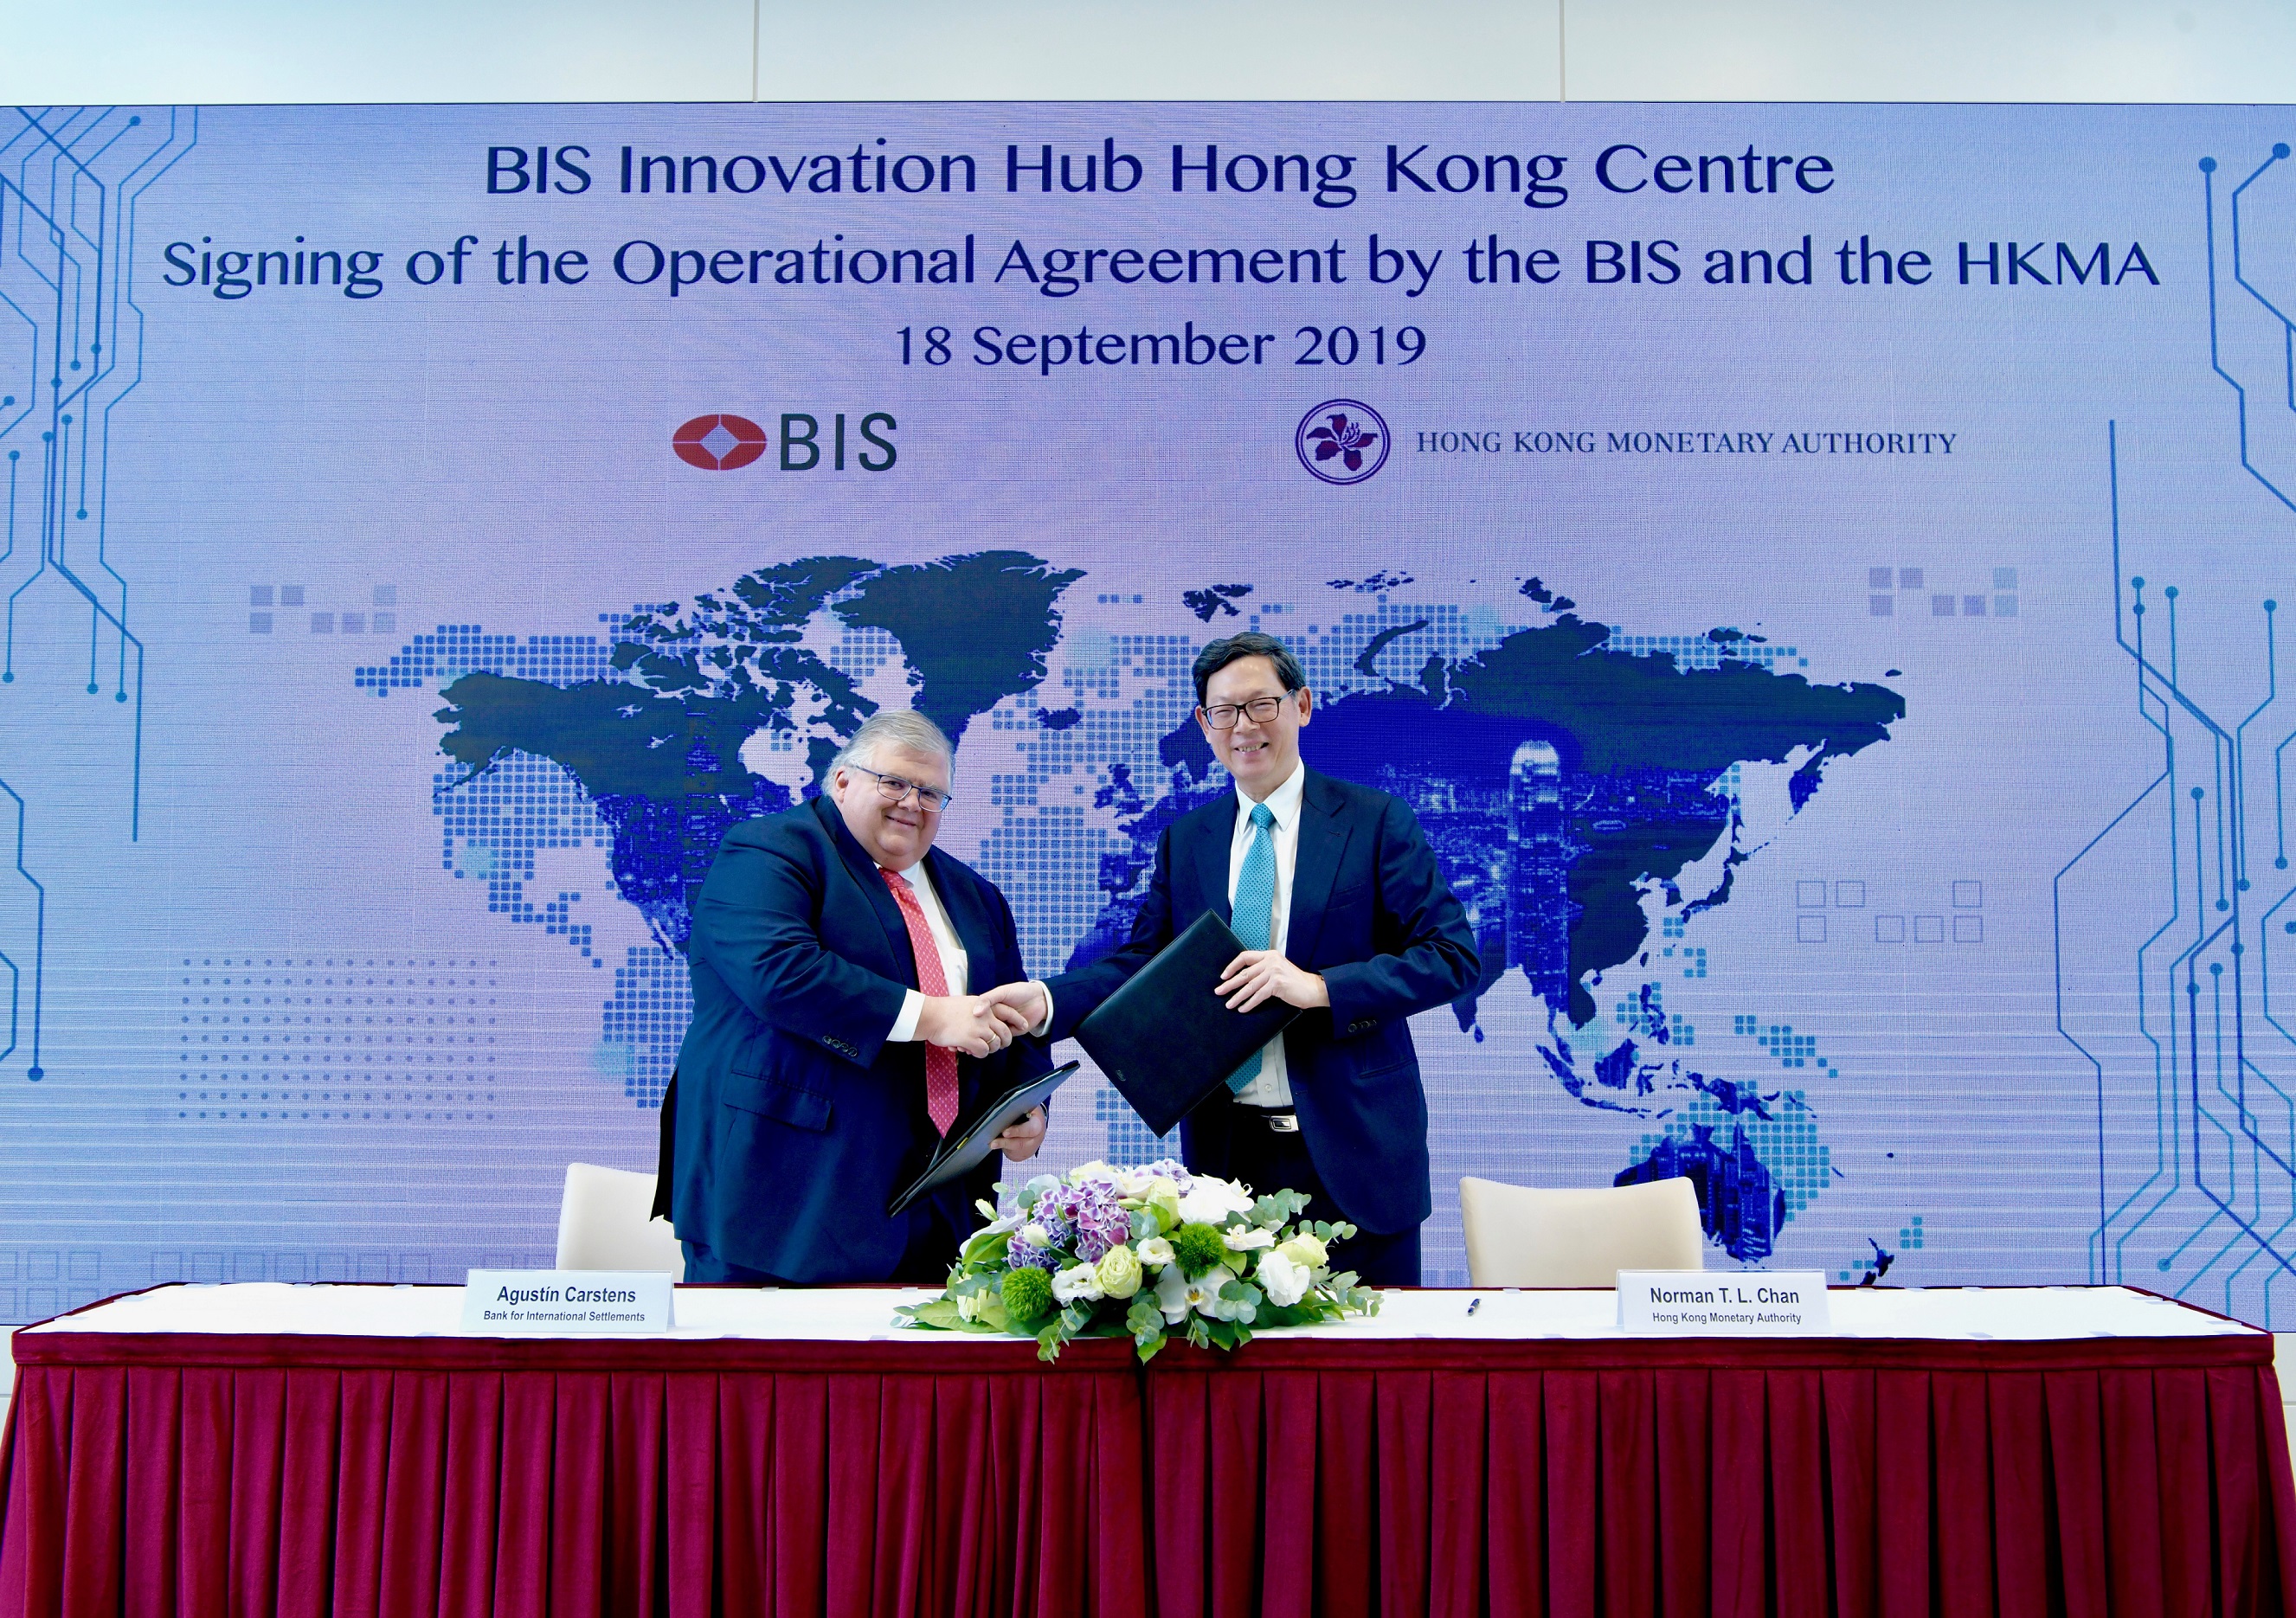 Agustín Carstens, General Manager of the BIS (left) and Norman Chan, Chief Executive of the HKMA, signed the Operational Agreement, formally marking the cooperation between the BIS and the HKMA on the BIS Innovation Hub Centre in Hong Kong.